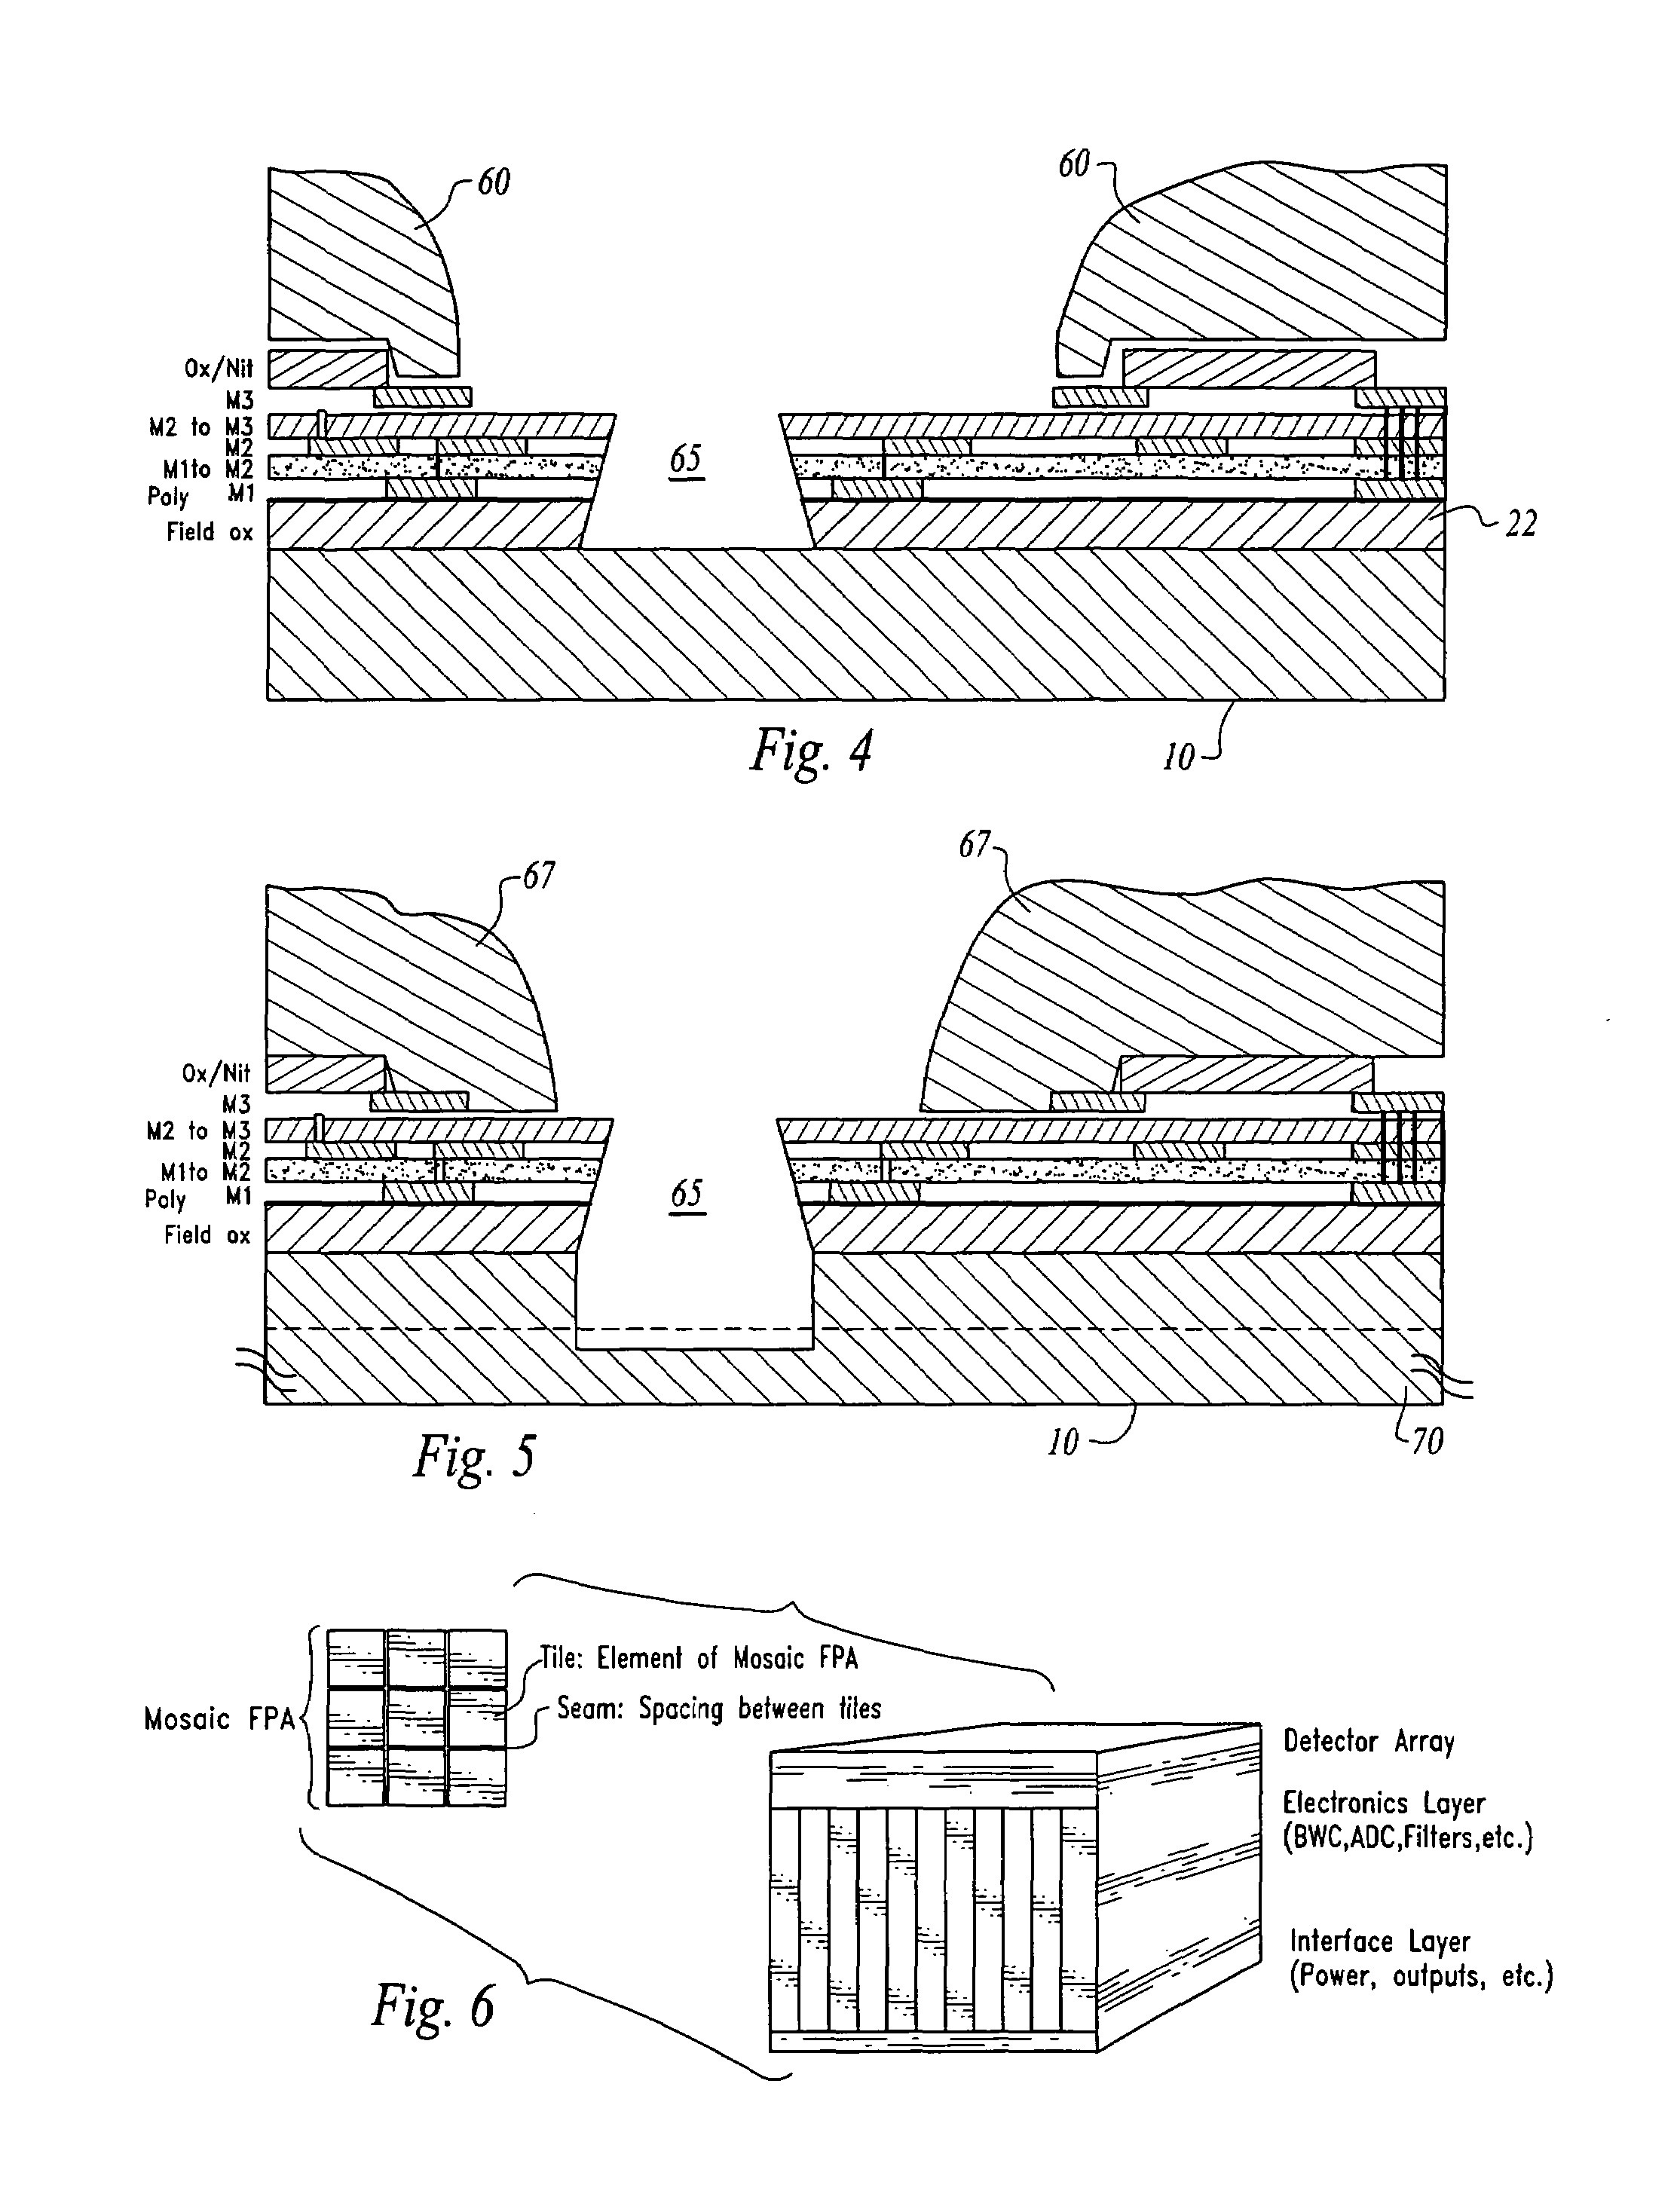 Method for precision integrated circuit die singulation using differential etch rates